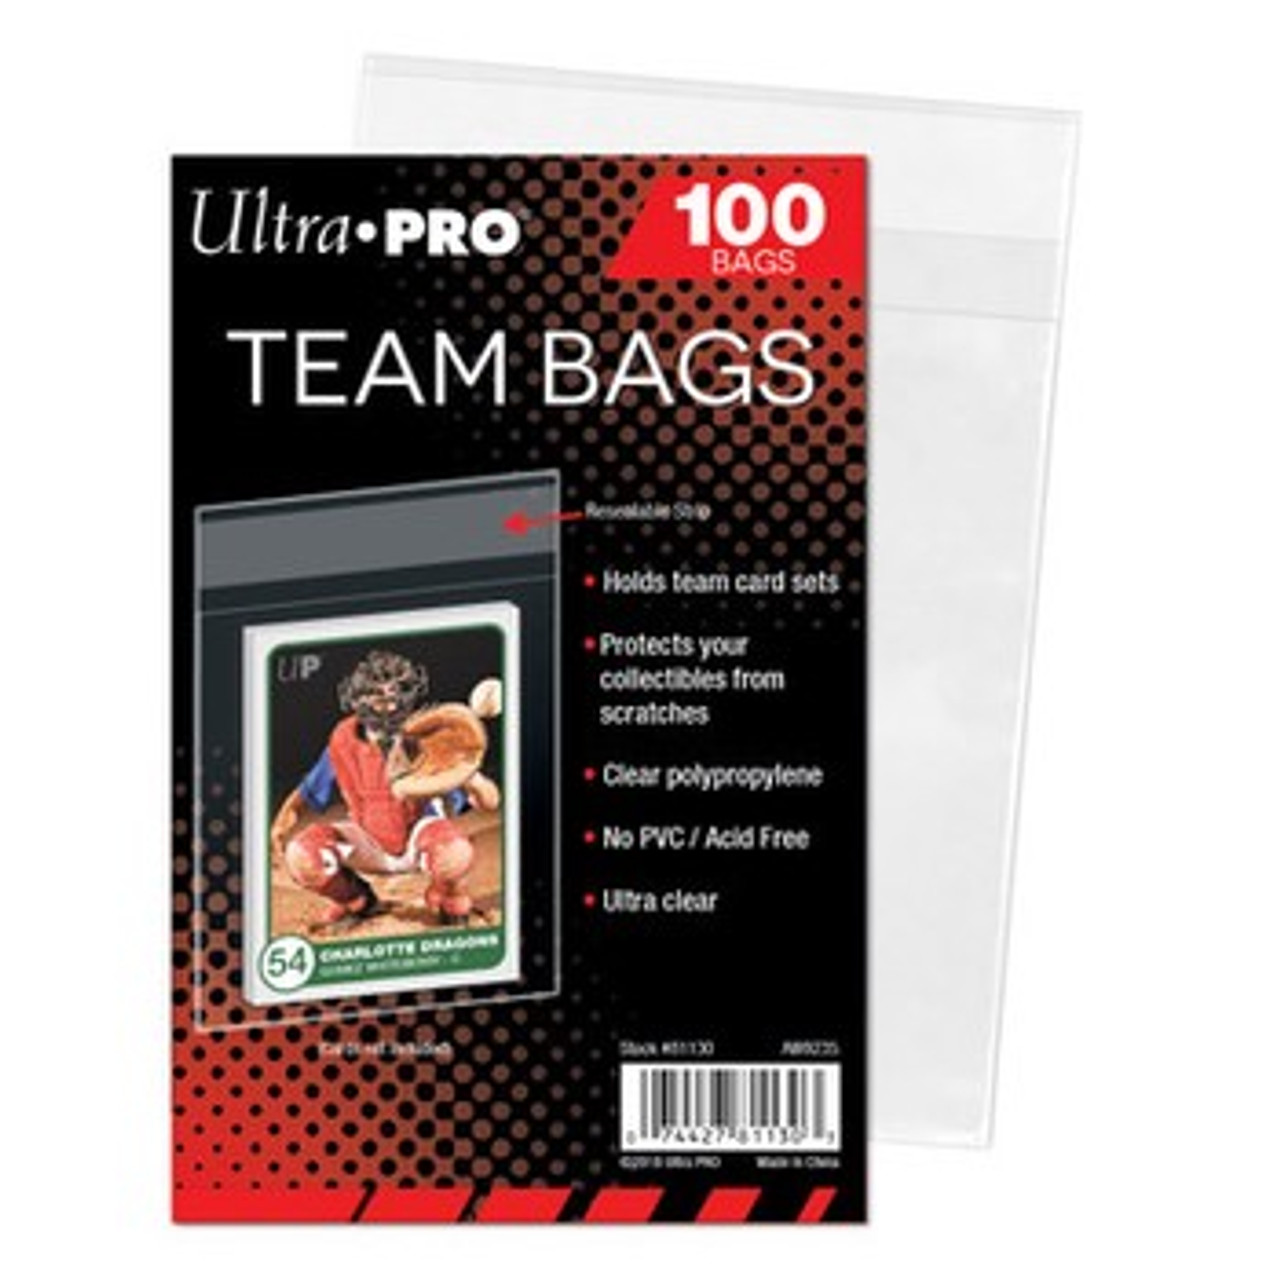 Ultra Pro Team Bags Resealable Sleeves 100ct